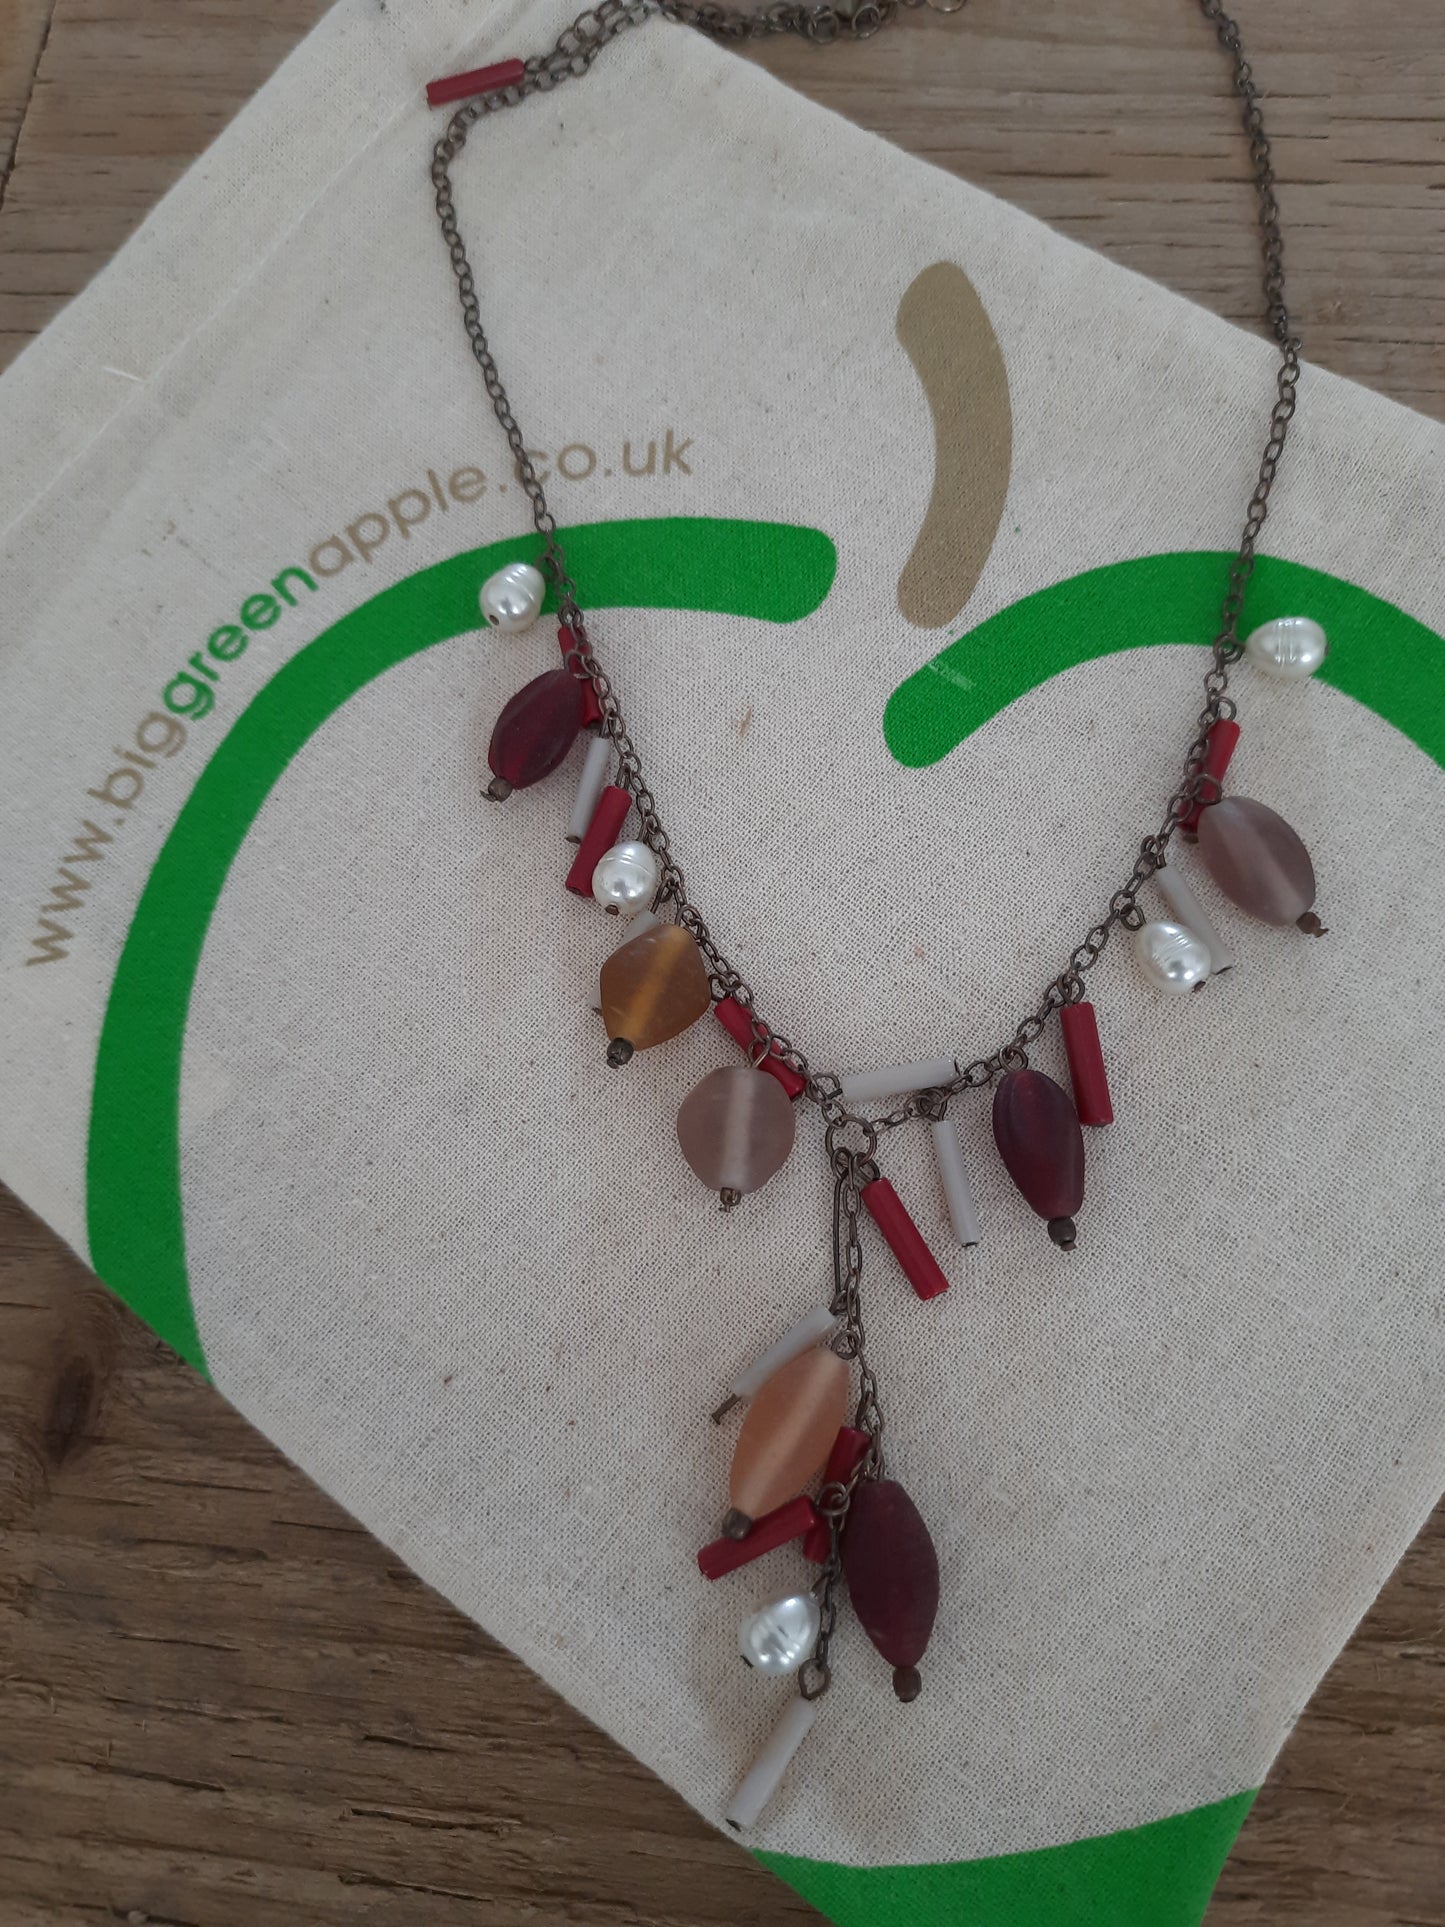 Necklaces, Jewellery, UK Ethical Jewellery, Eco Gifts For Her, Gift Ideas, Jewellery Set, BIG GREEN APPLE